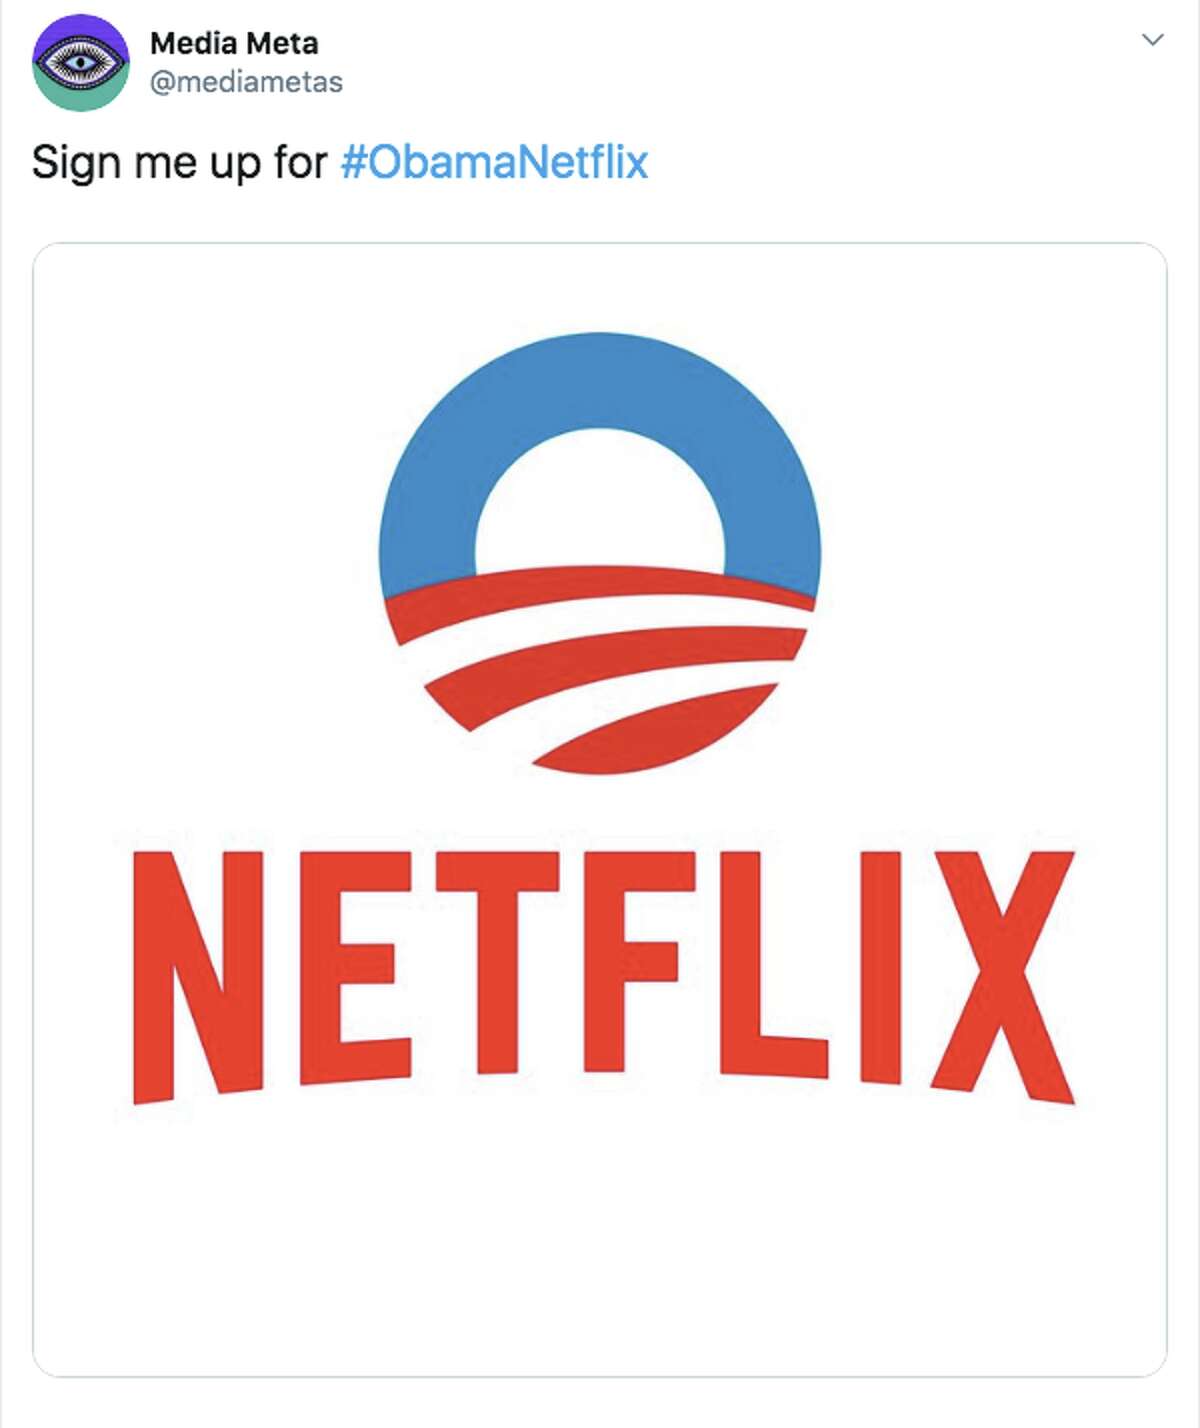 In the hours after President Trump sent out a tweet suggesting that Congress investigate Barack and Michelle Obama's deal with streaming giant Netflix, social media users are having a field day lampooning him and celebrating the idea of "Obama Netflix."